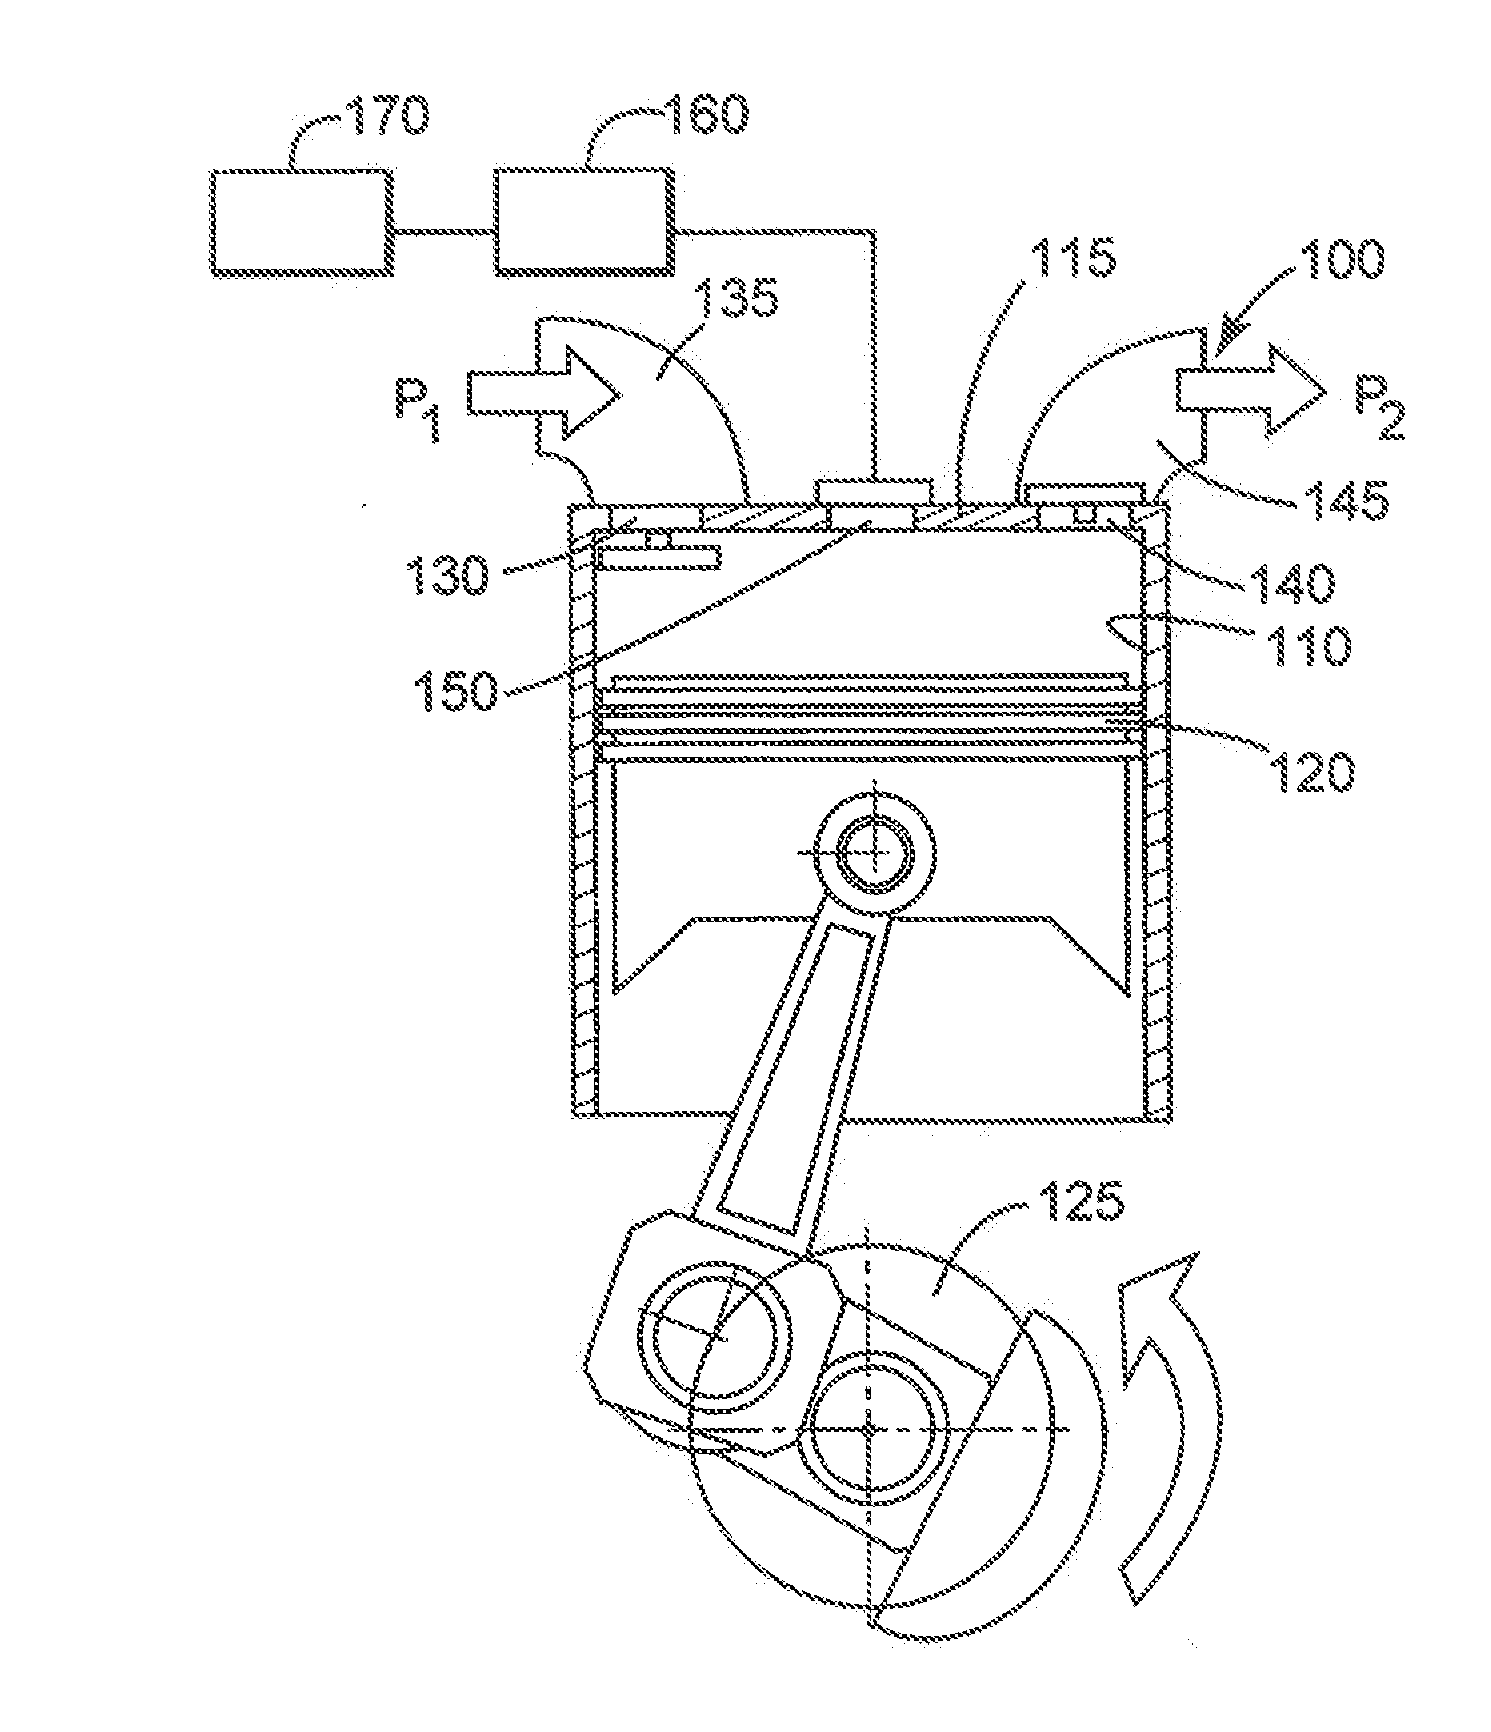 Reciprocating compressors having timing valves and related methods